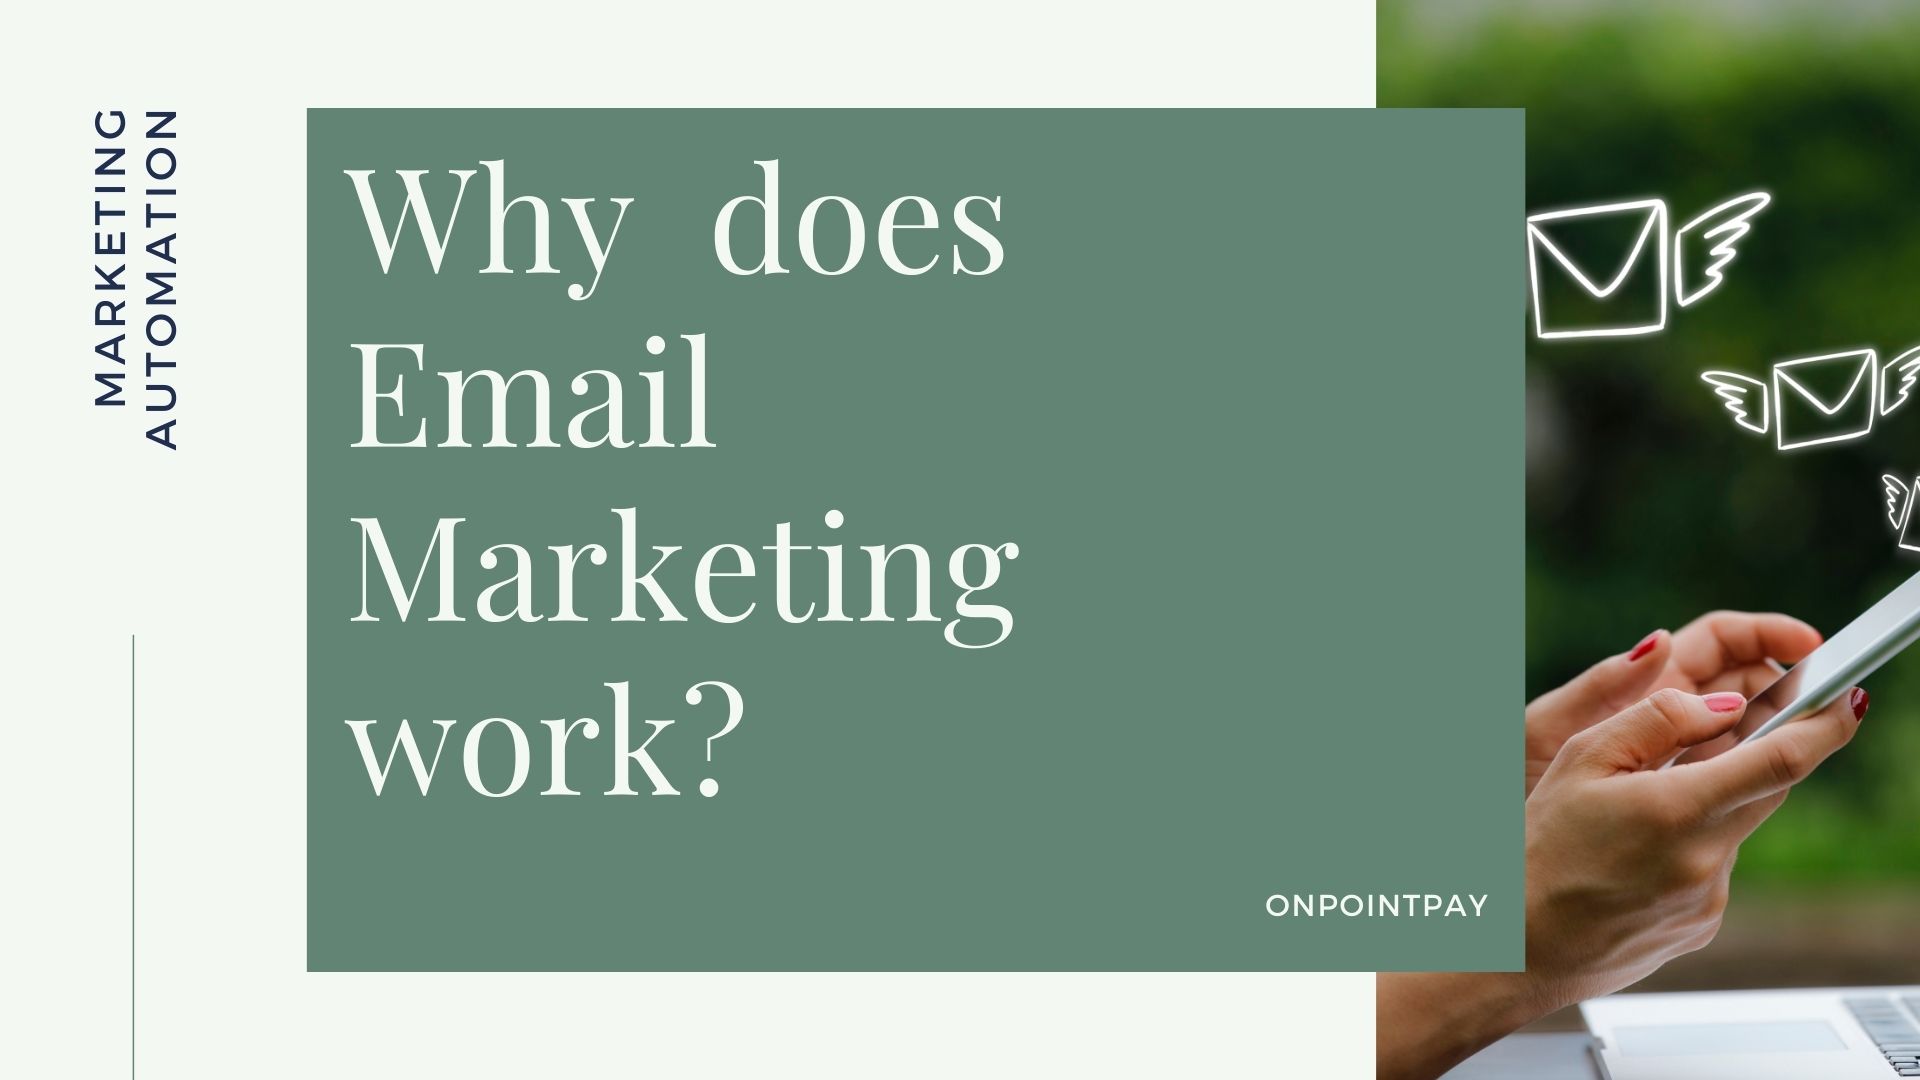 Why does Email Marketing work?